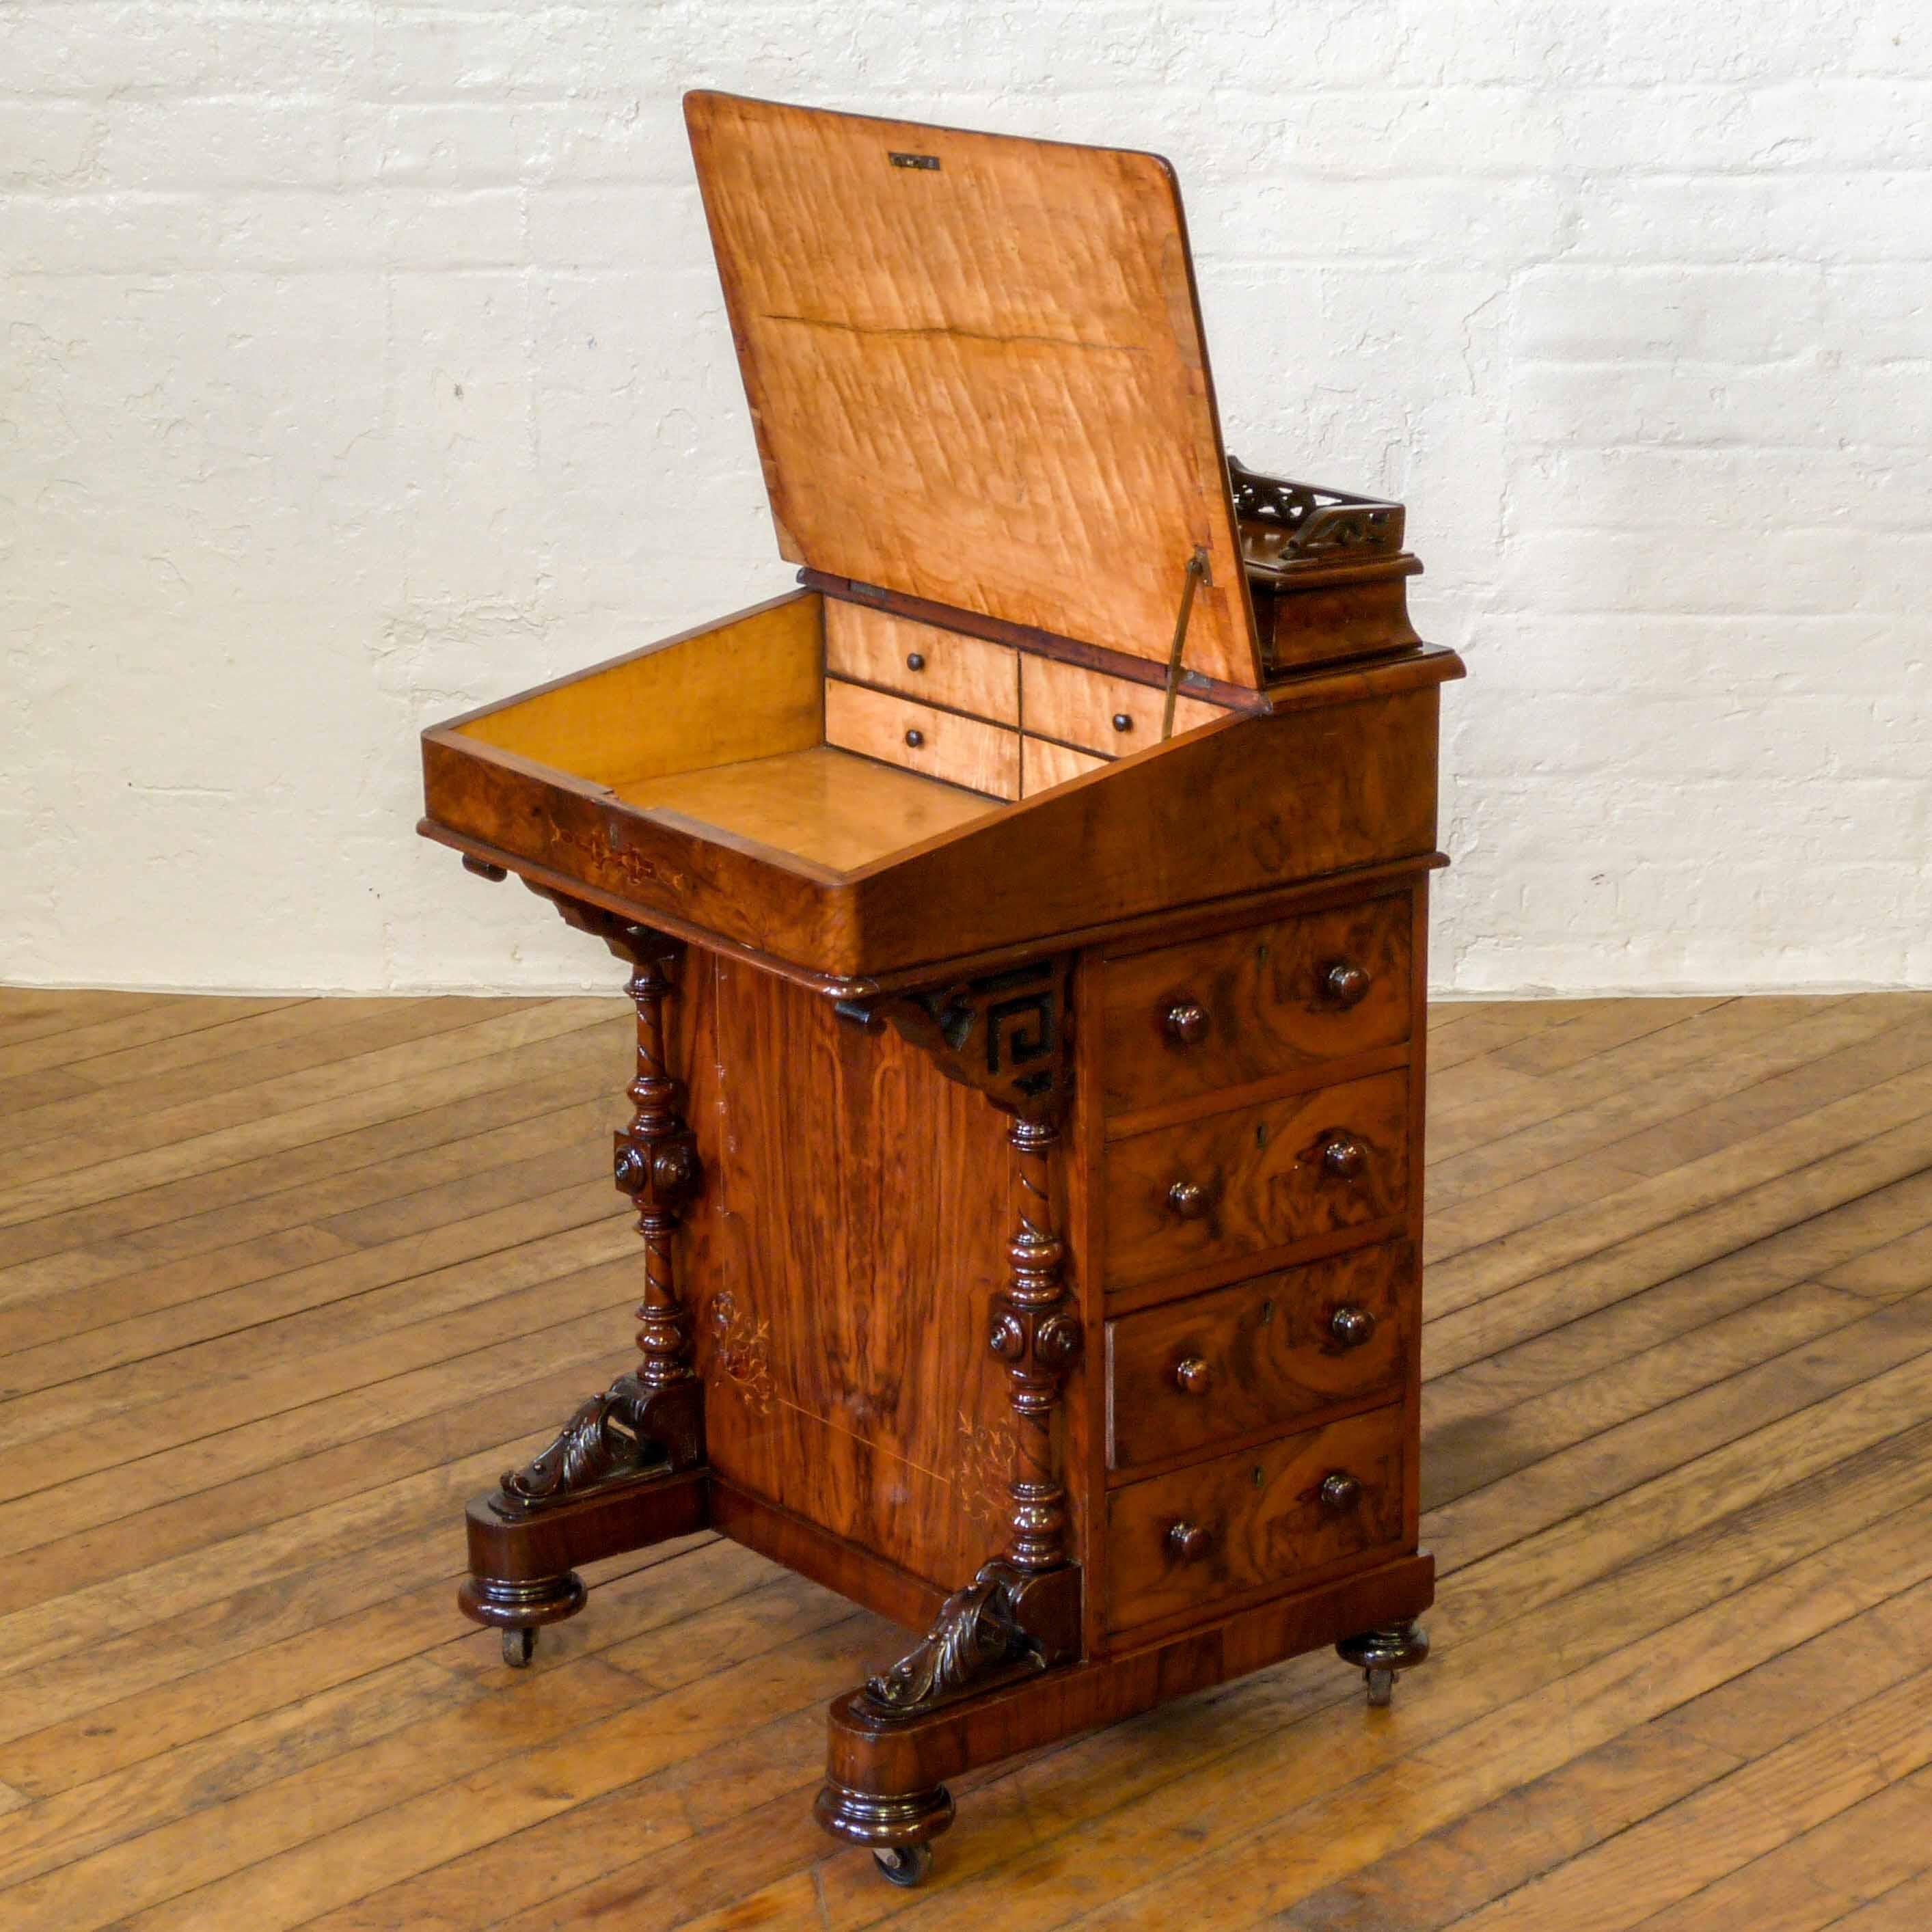 An attractive inlaid burr walnut davenport from the Victorian period. With dummy drawers to one side and the real working ones to the other(as is the case with most davenports). The maple interior has two drawers and the upper hinged lid has a